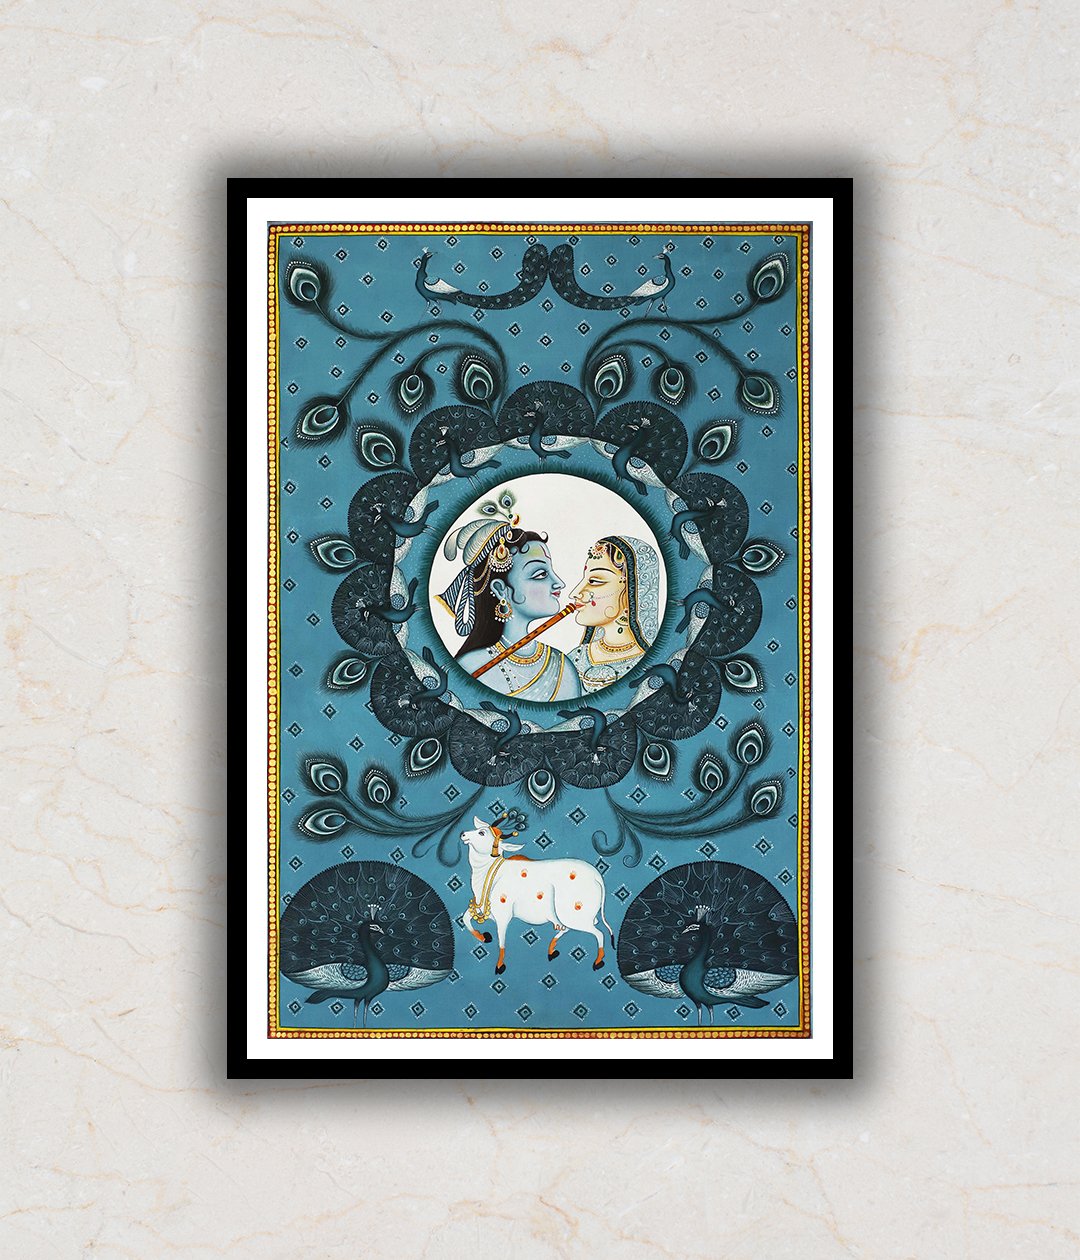 Contemporary Style Radha Krishna Cow and Peacocks Pichwai Art Painting For Home Wall Art Decor